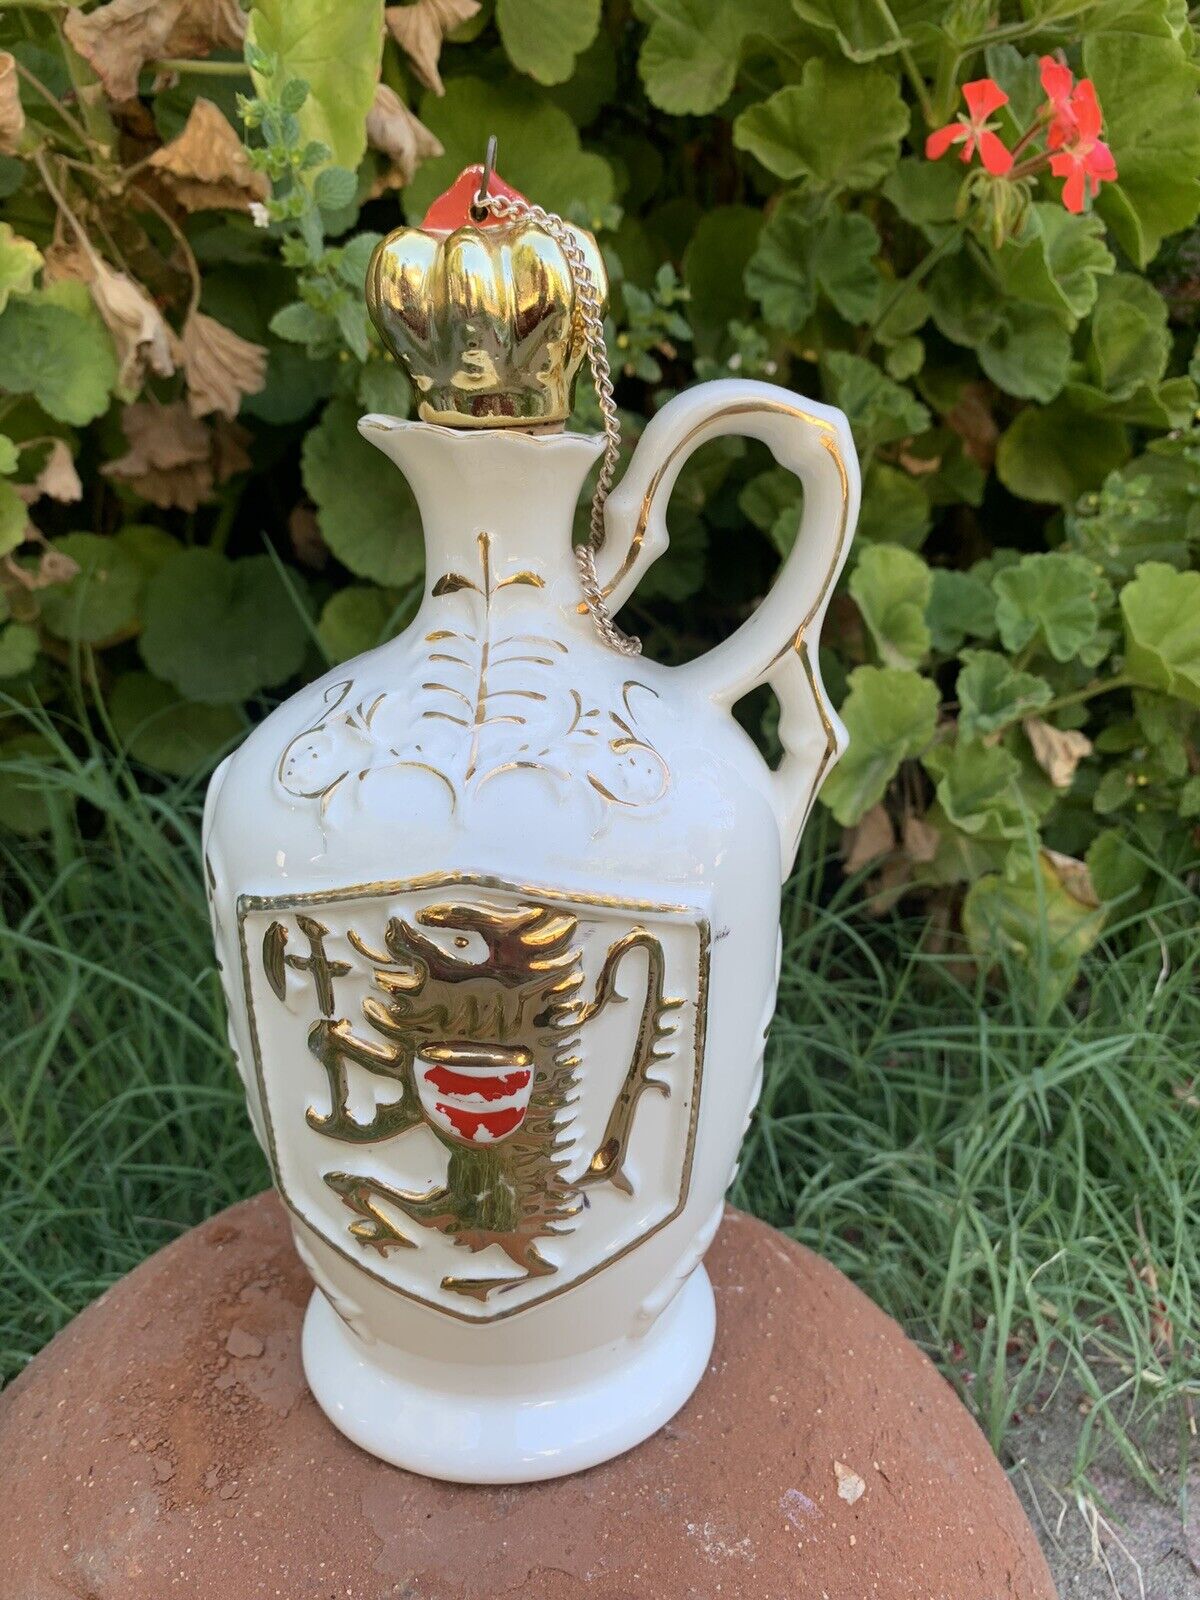 Vintage Wine Bottle Decanter Music Box With Royal Crown Shield And Symbols